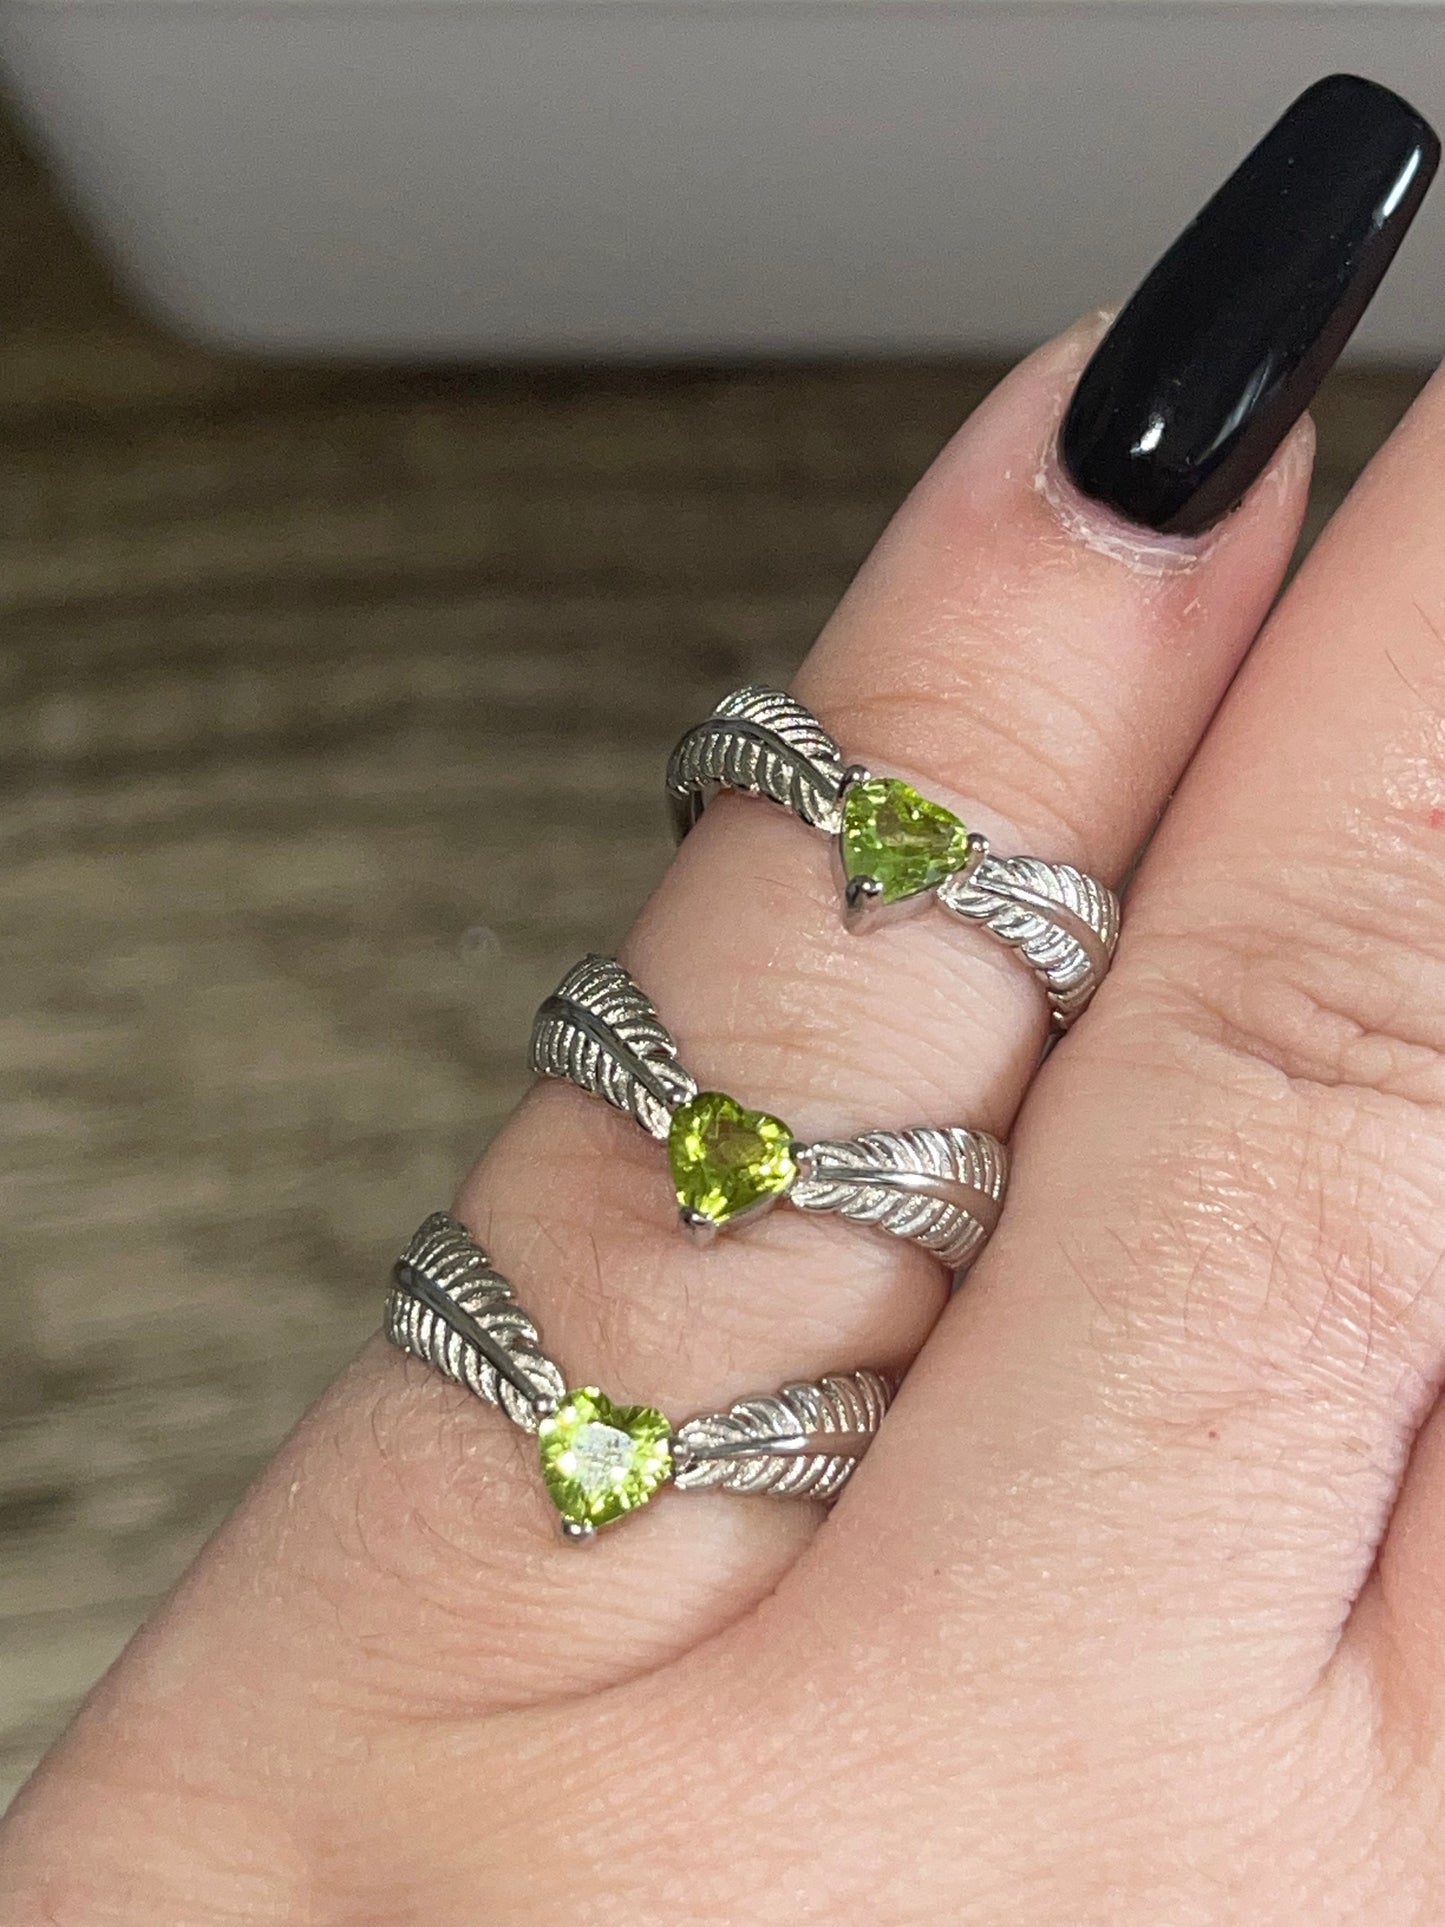 PERIDOT RING - Cleanses Toxins, Alleviates Jealousy/Greed, Opens Heart to Joy and New Relationships